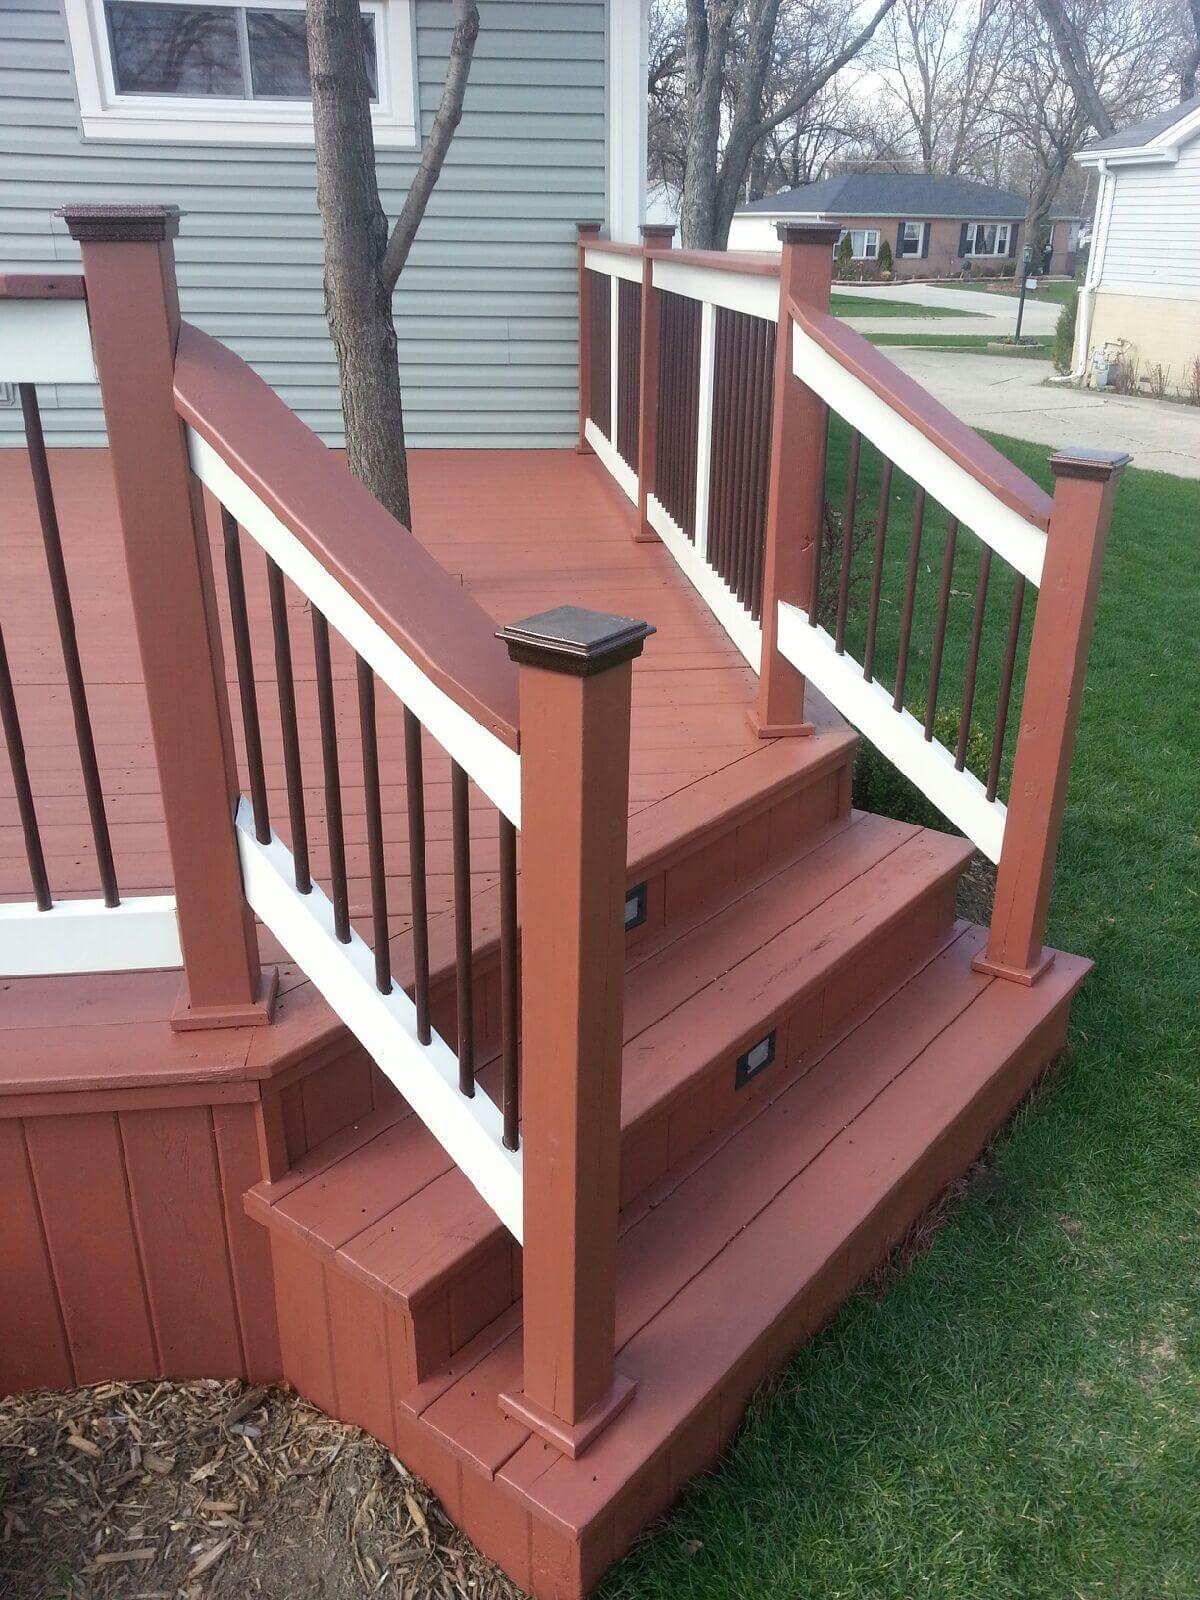 Repairs and maintenance for your deck, fence, and exterior wood staining. - Deck Staining Prospect Heights - Deck Cleaning Services